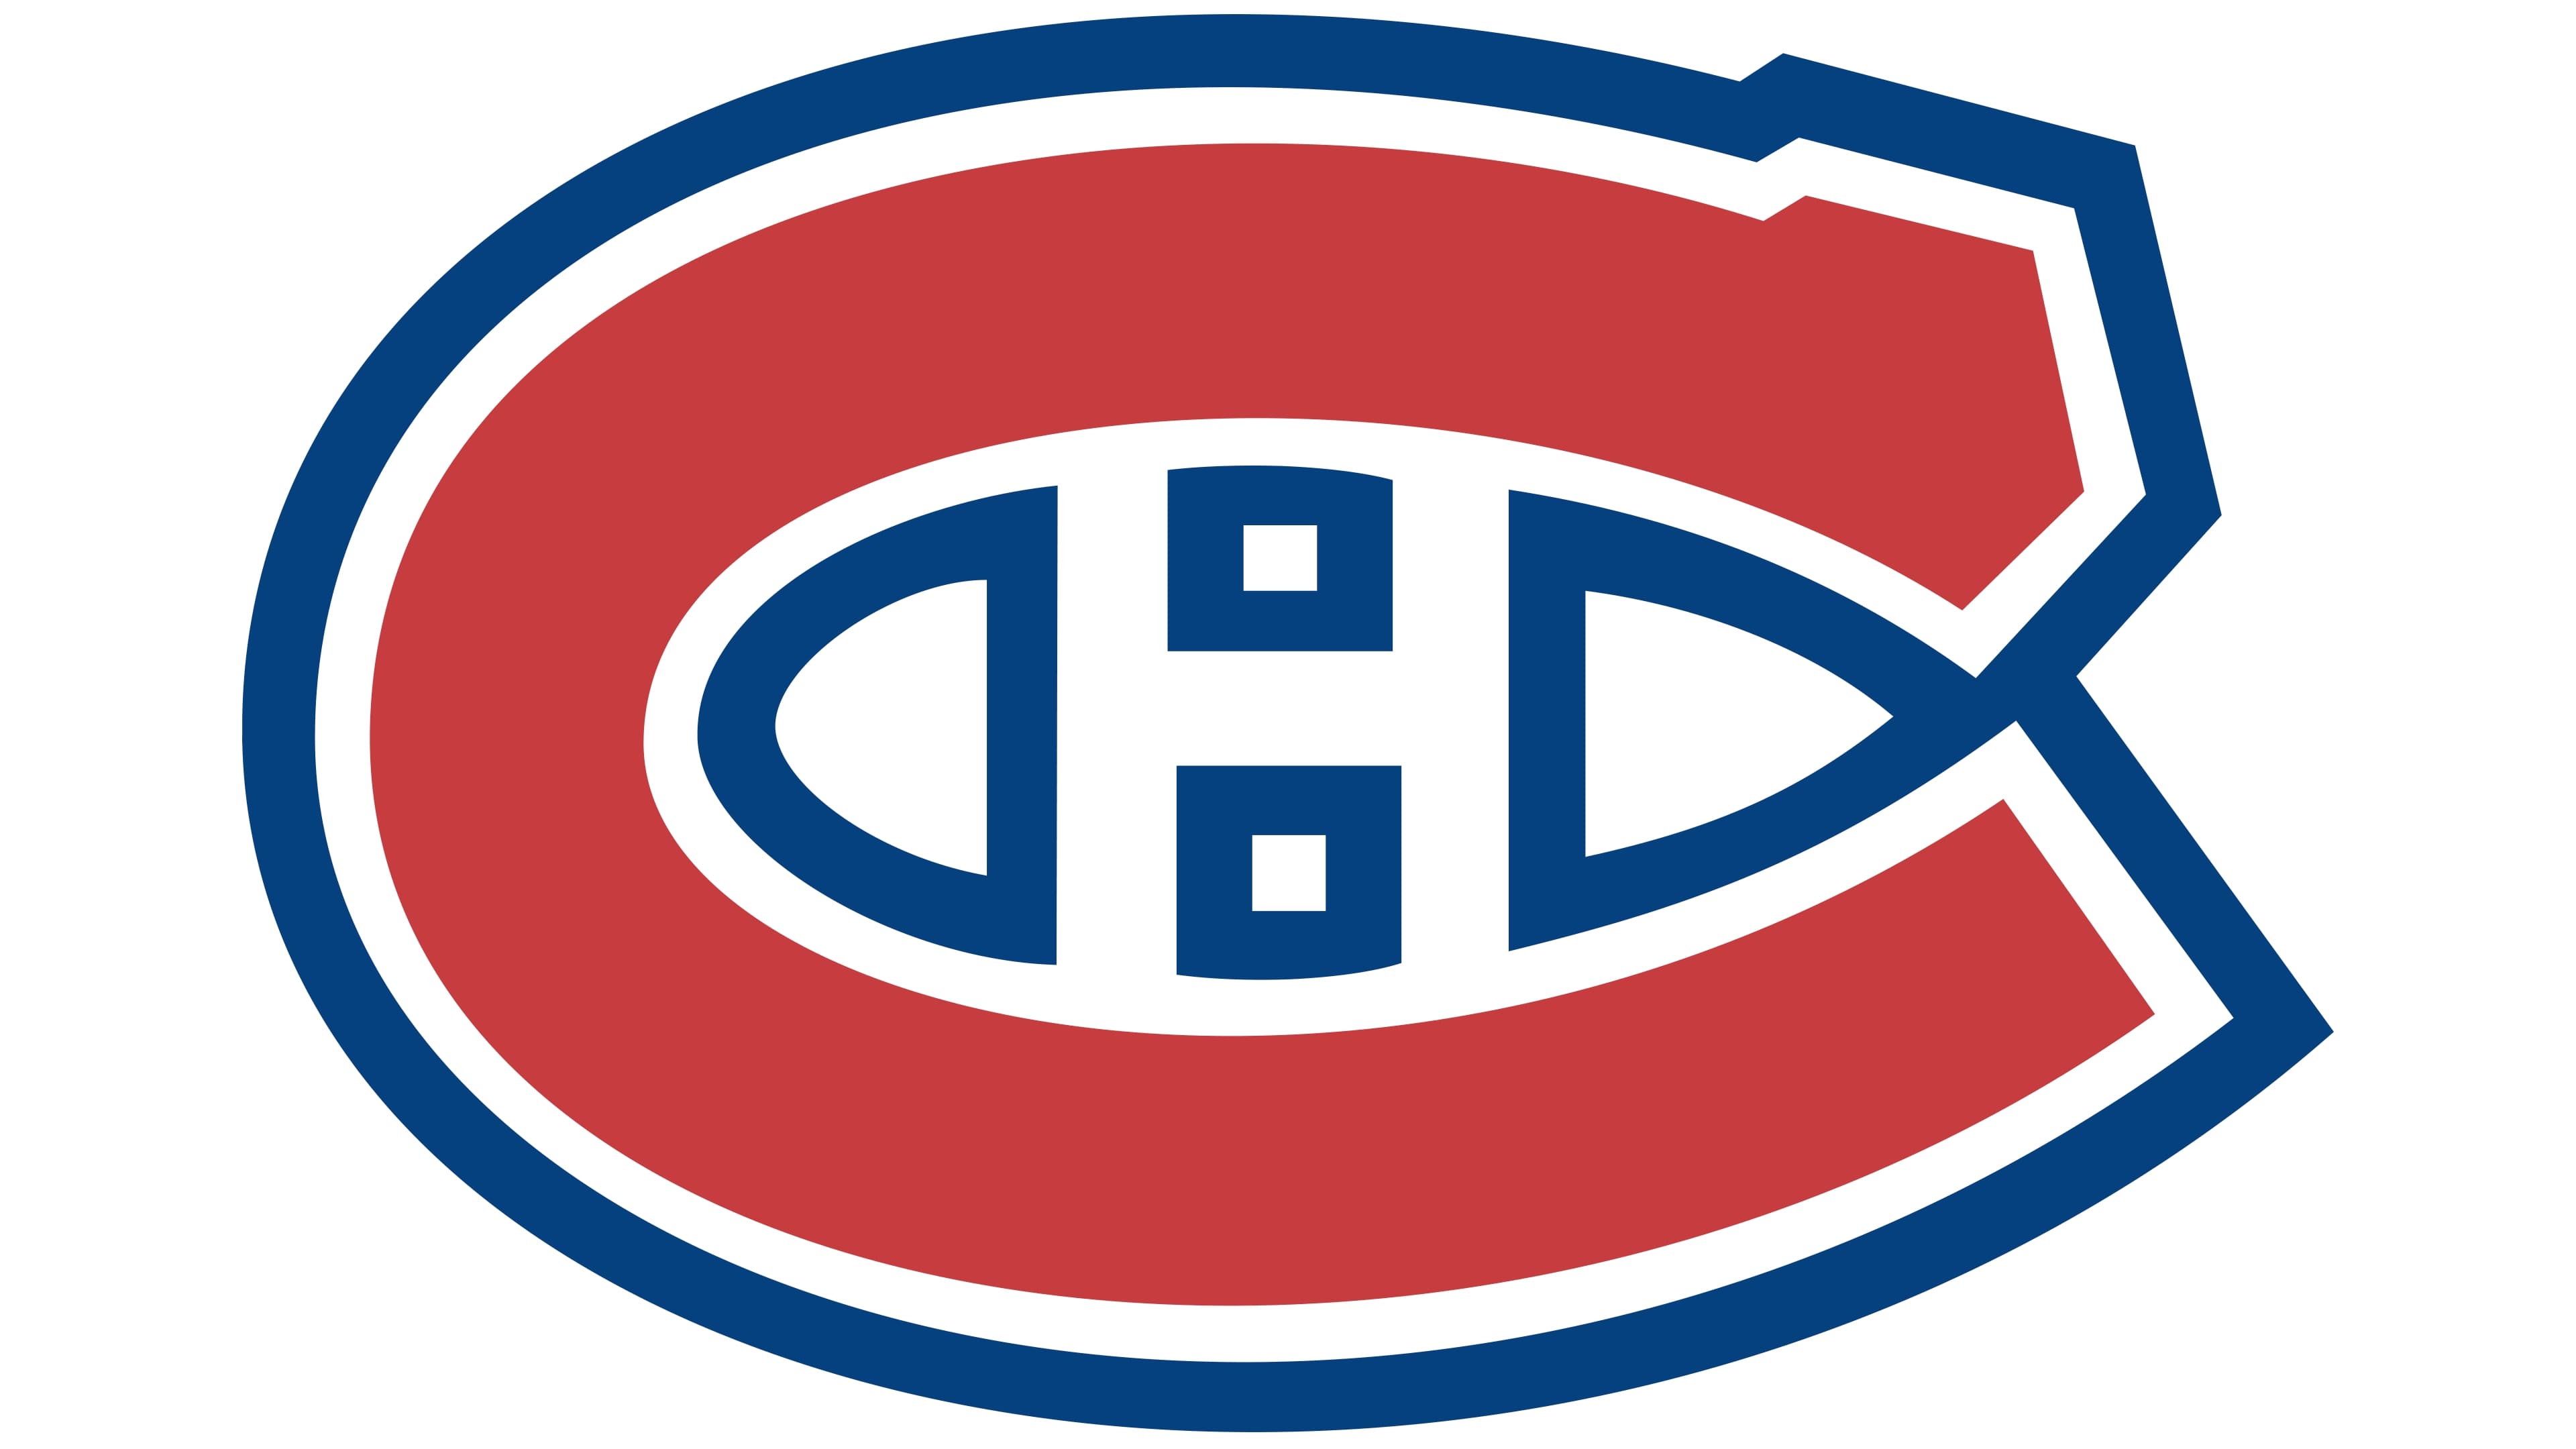 Montreal Canadiens represent identity check for New Jersey Devils